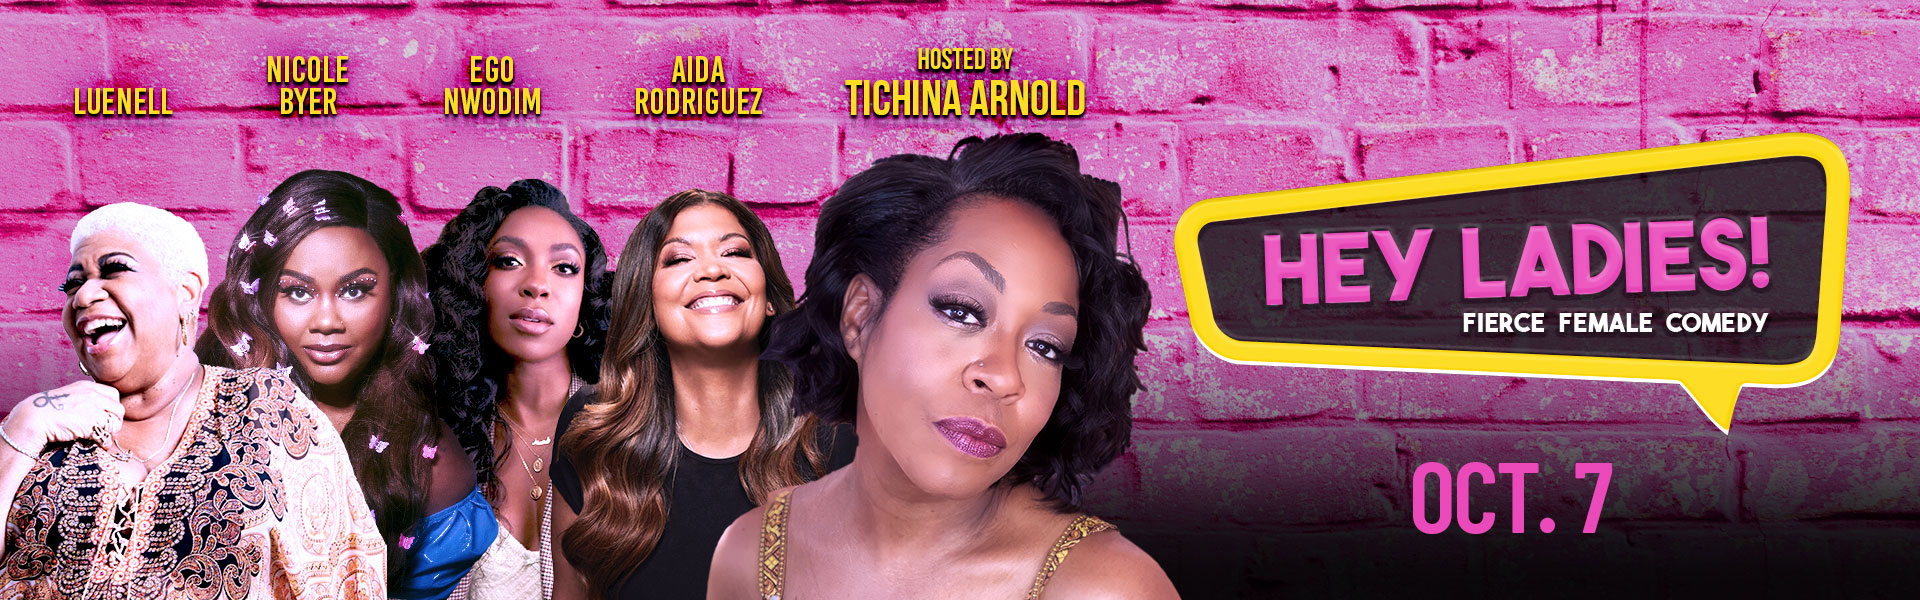 Hey Ladies Fierce Female Comedy Show hosted by Tichina Arnold. Performances by Luenell, Nicole Byer, Ego Nwodim and Aida Rodriguez.